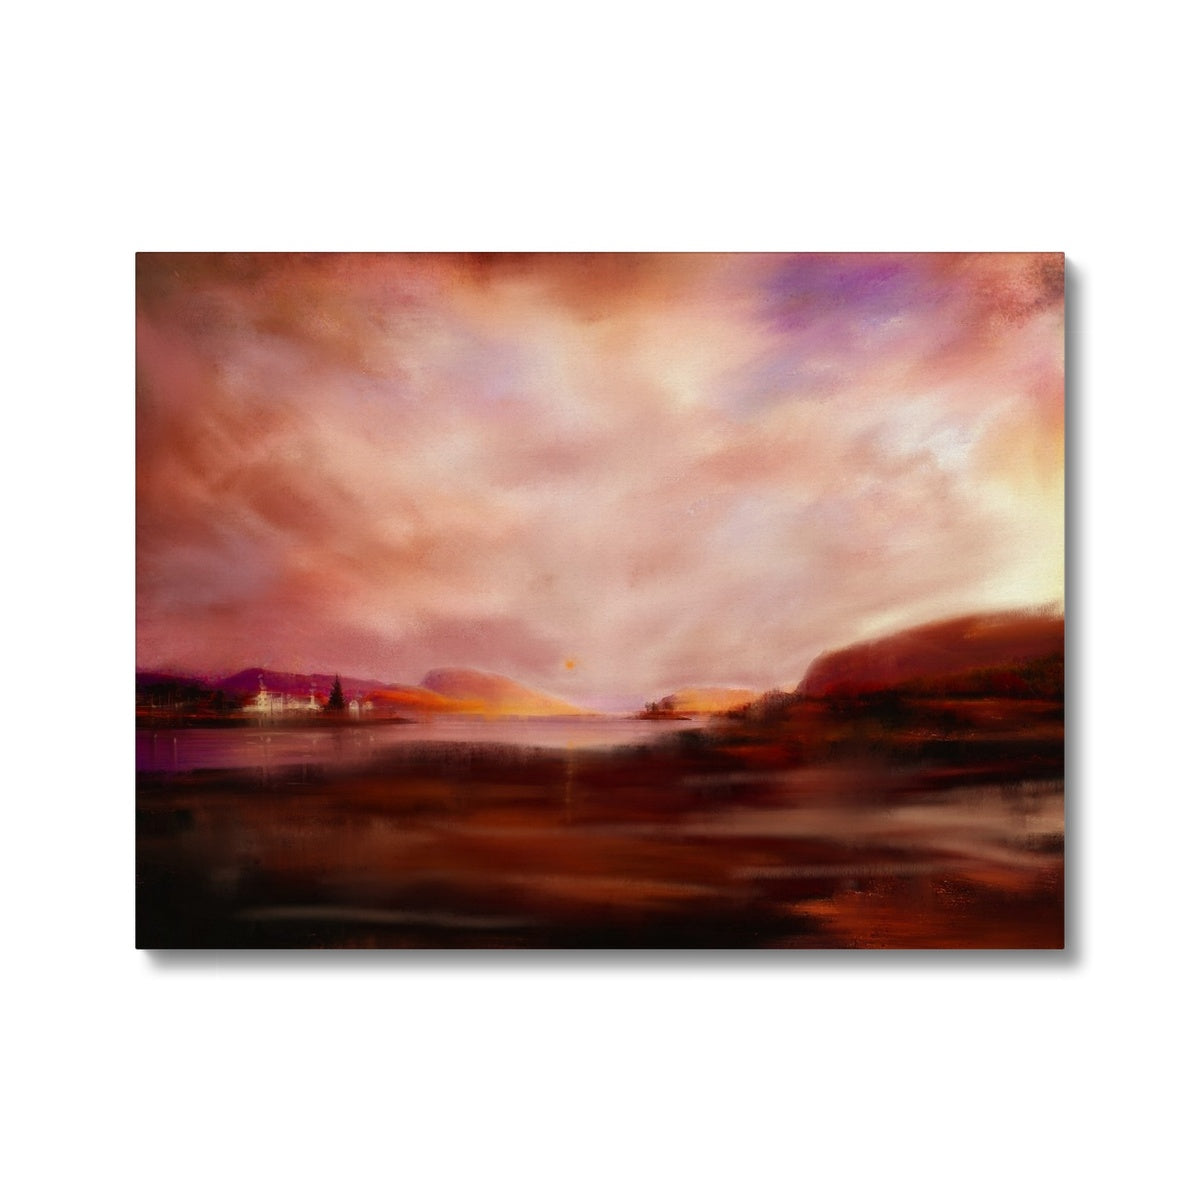 Plockton Sunset Painting | Canvas From Scotland-Contemporary Stretched Canvas Prints-Scottish Highlands & Lowlands Art Gallery-24"x18"-Paintings, Prints, Homeware, Art Gifts From Scotland By Scottish Artist Kevin Hunter